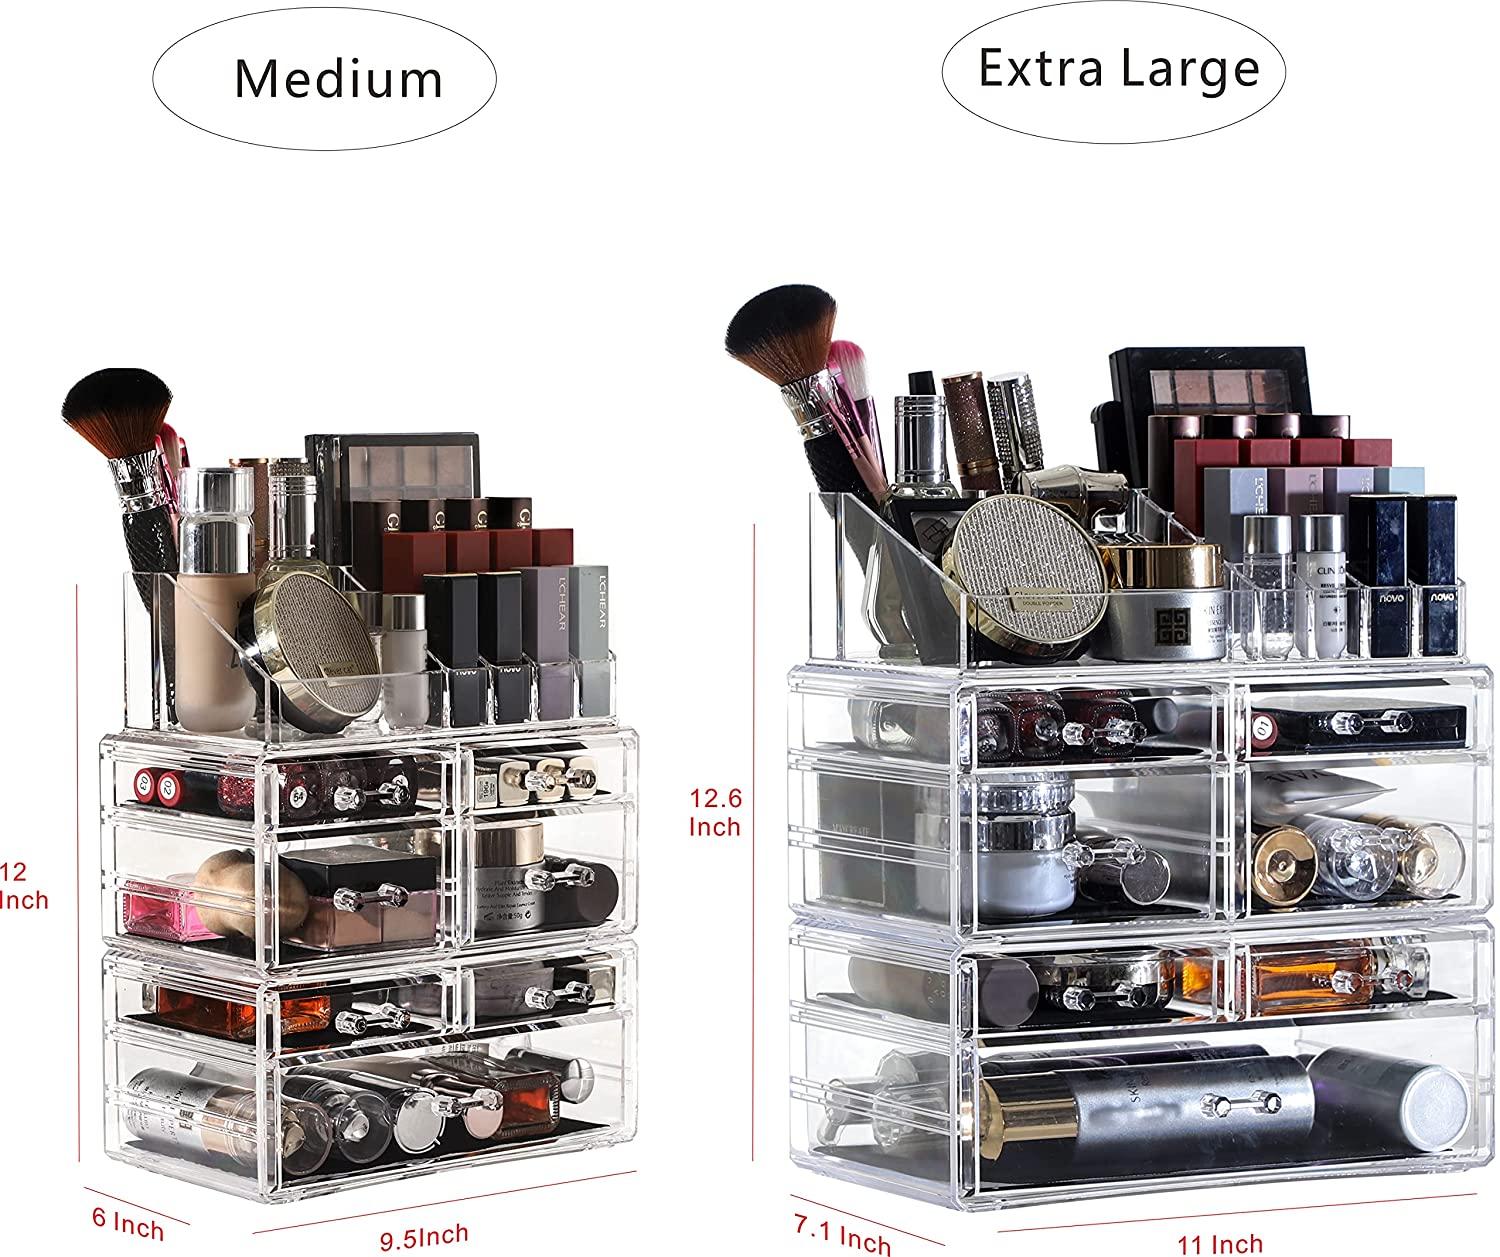 Cq acrylic 2PCS Clear Containers for Organizing 7 Drawers Stackable Dresser  Bathroom Organizers And Storage For Jewelry Hair Accessories Nail Polish